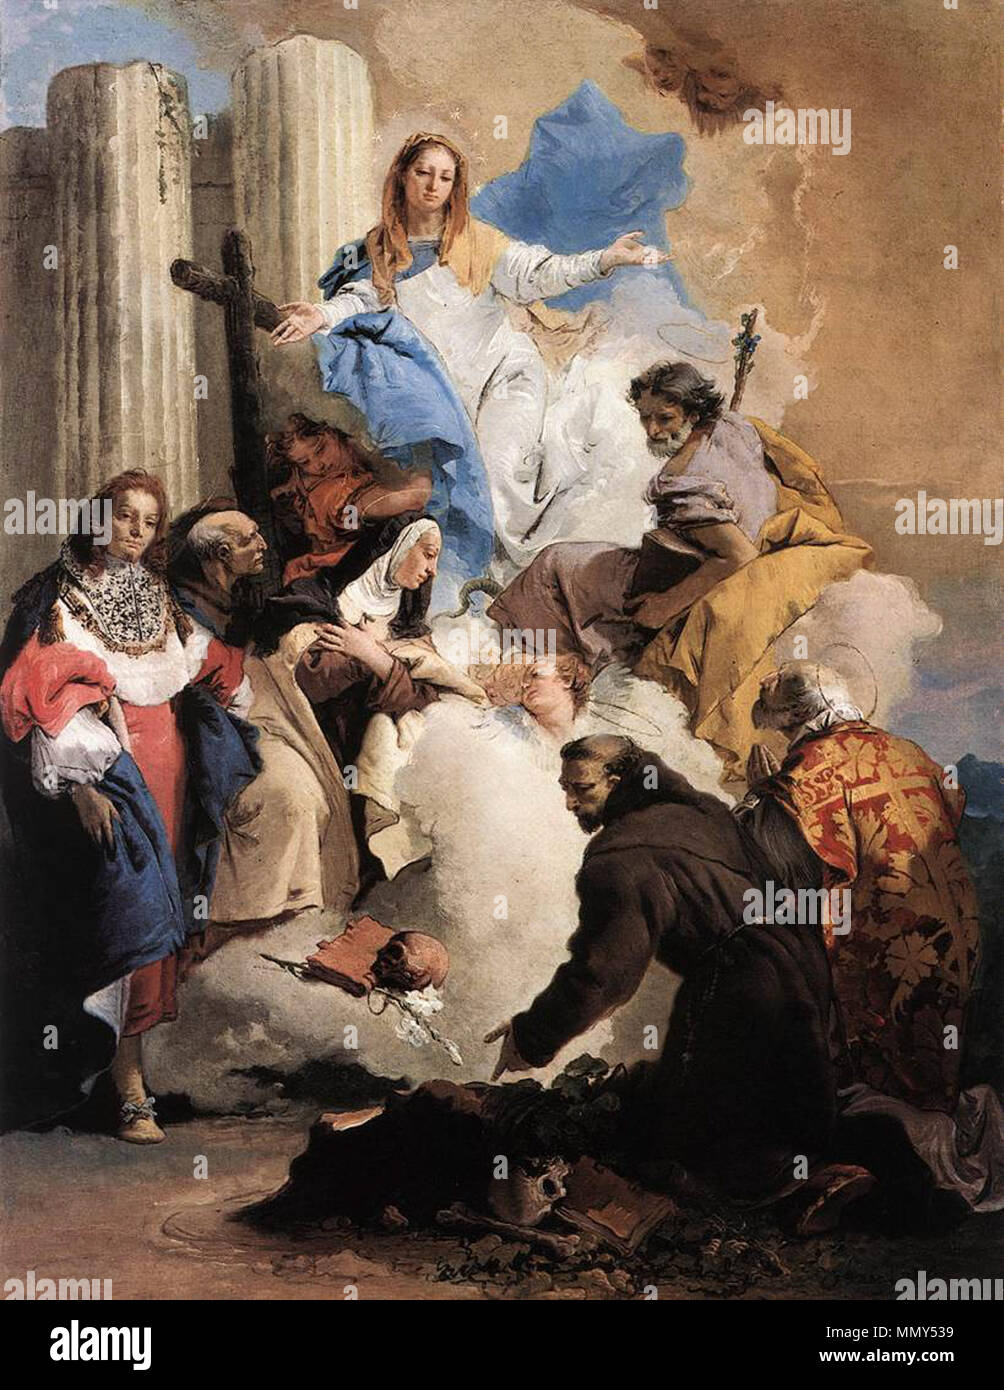 The Virgin with Six Saints. between 1737 and 1740. Giovanni Battista Tiepolo - The Virgin with Six Saints - WGA22284 Stock Photo